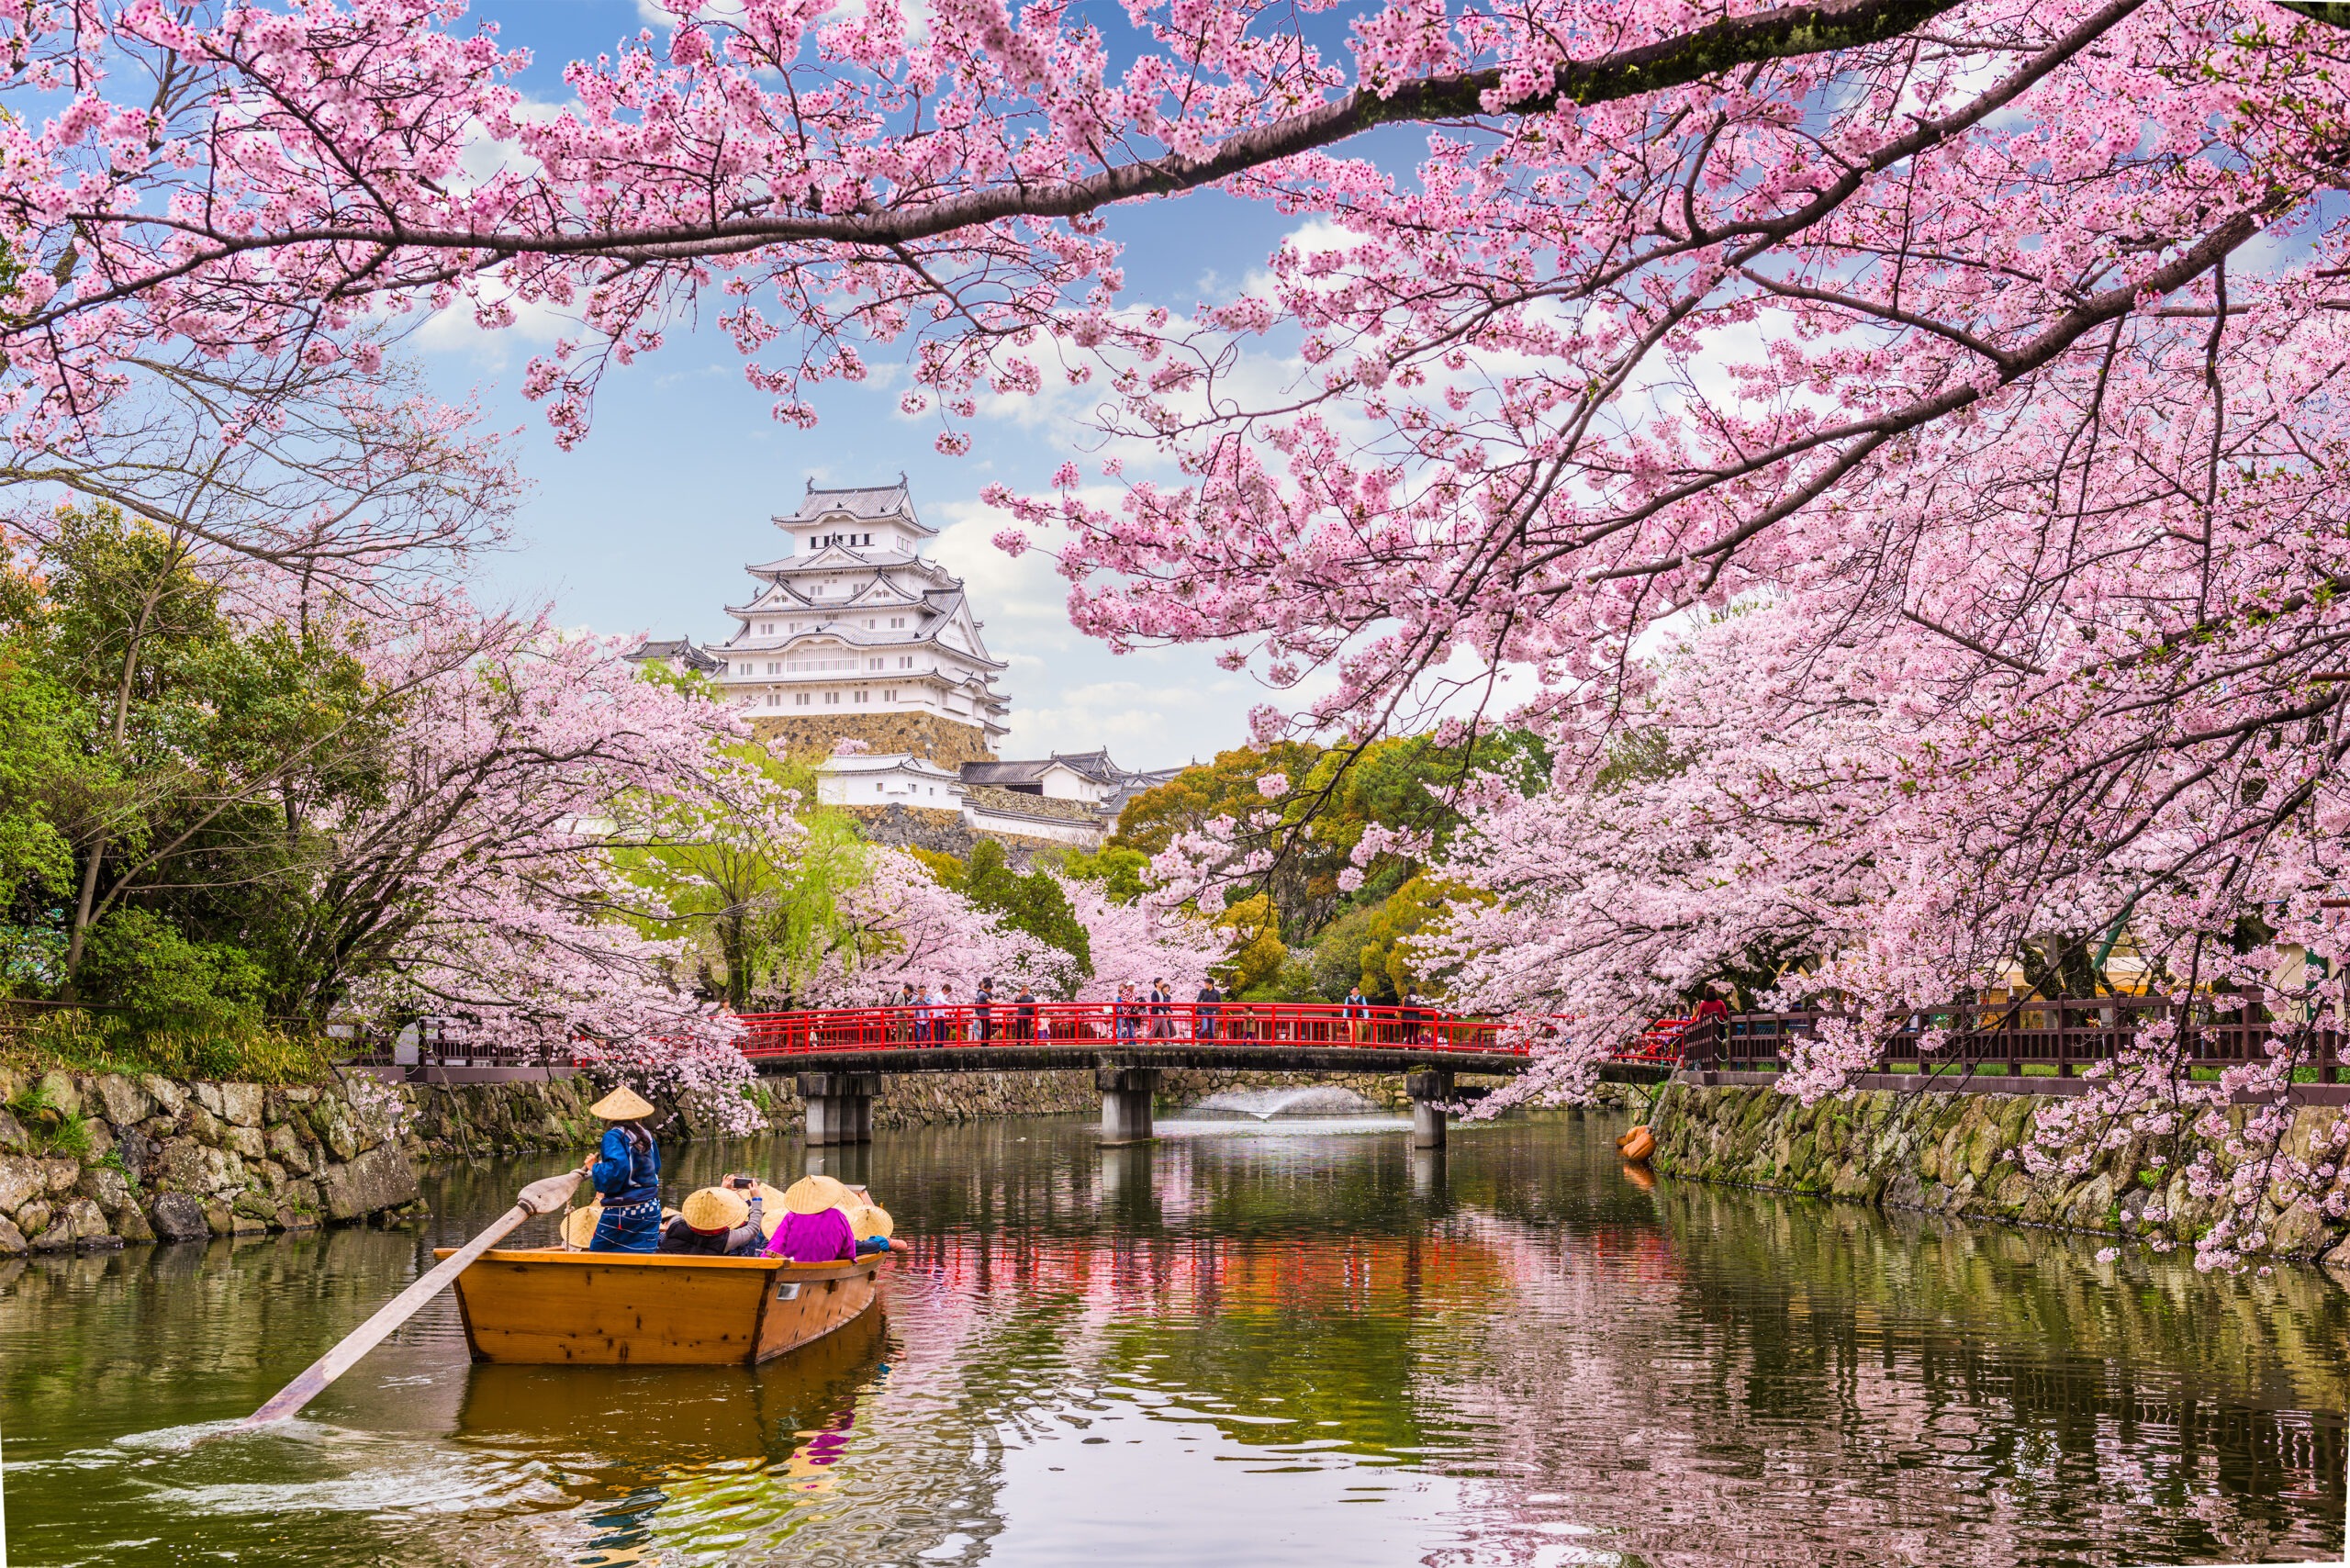 person rowing in boat next to cherry blossom trees